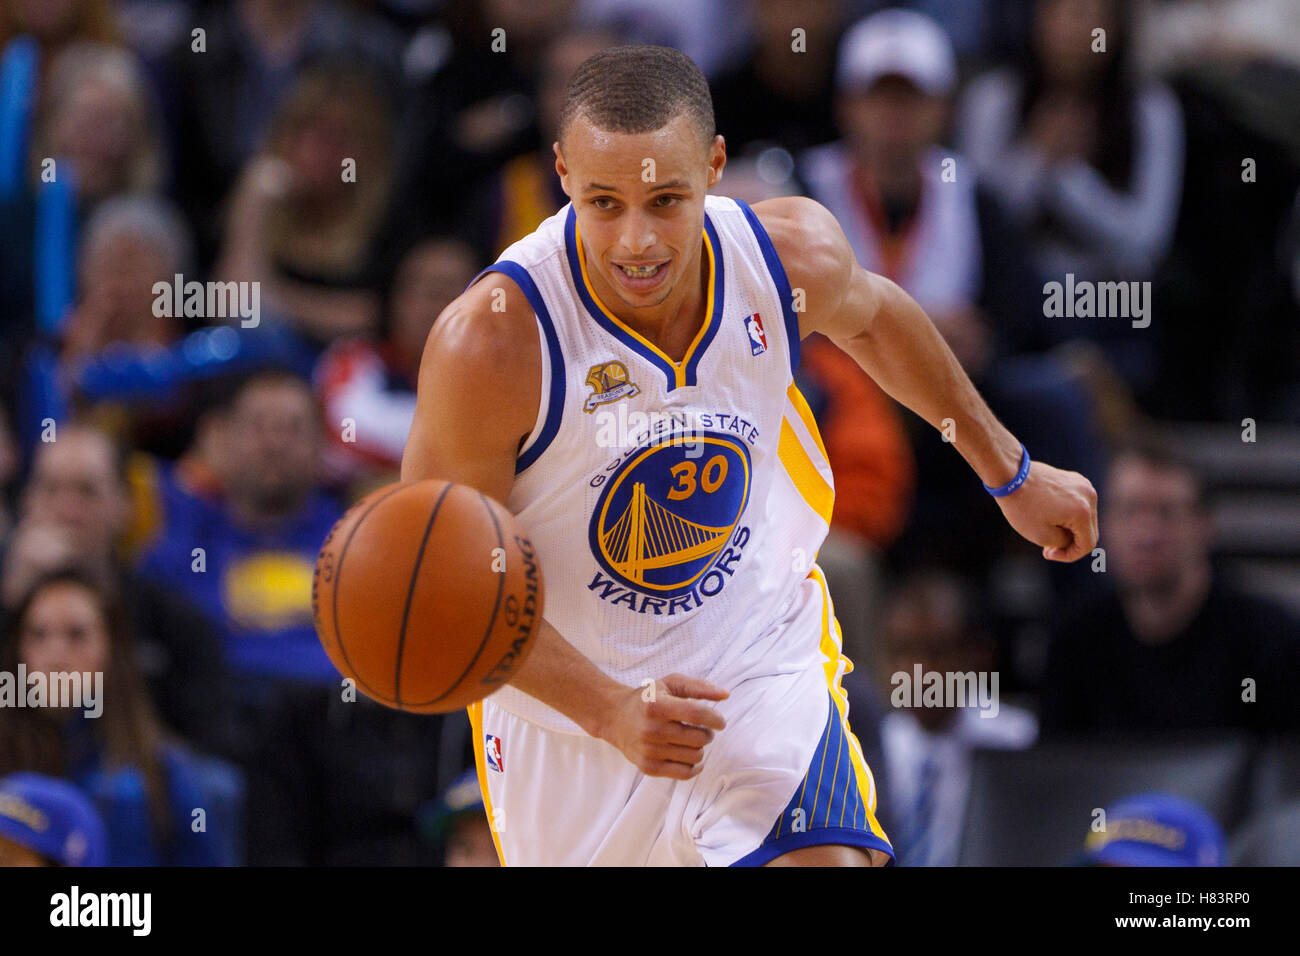 Steph Curry Stock Photos & Steph Curry Stock Images - Alamy1300 x 956